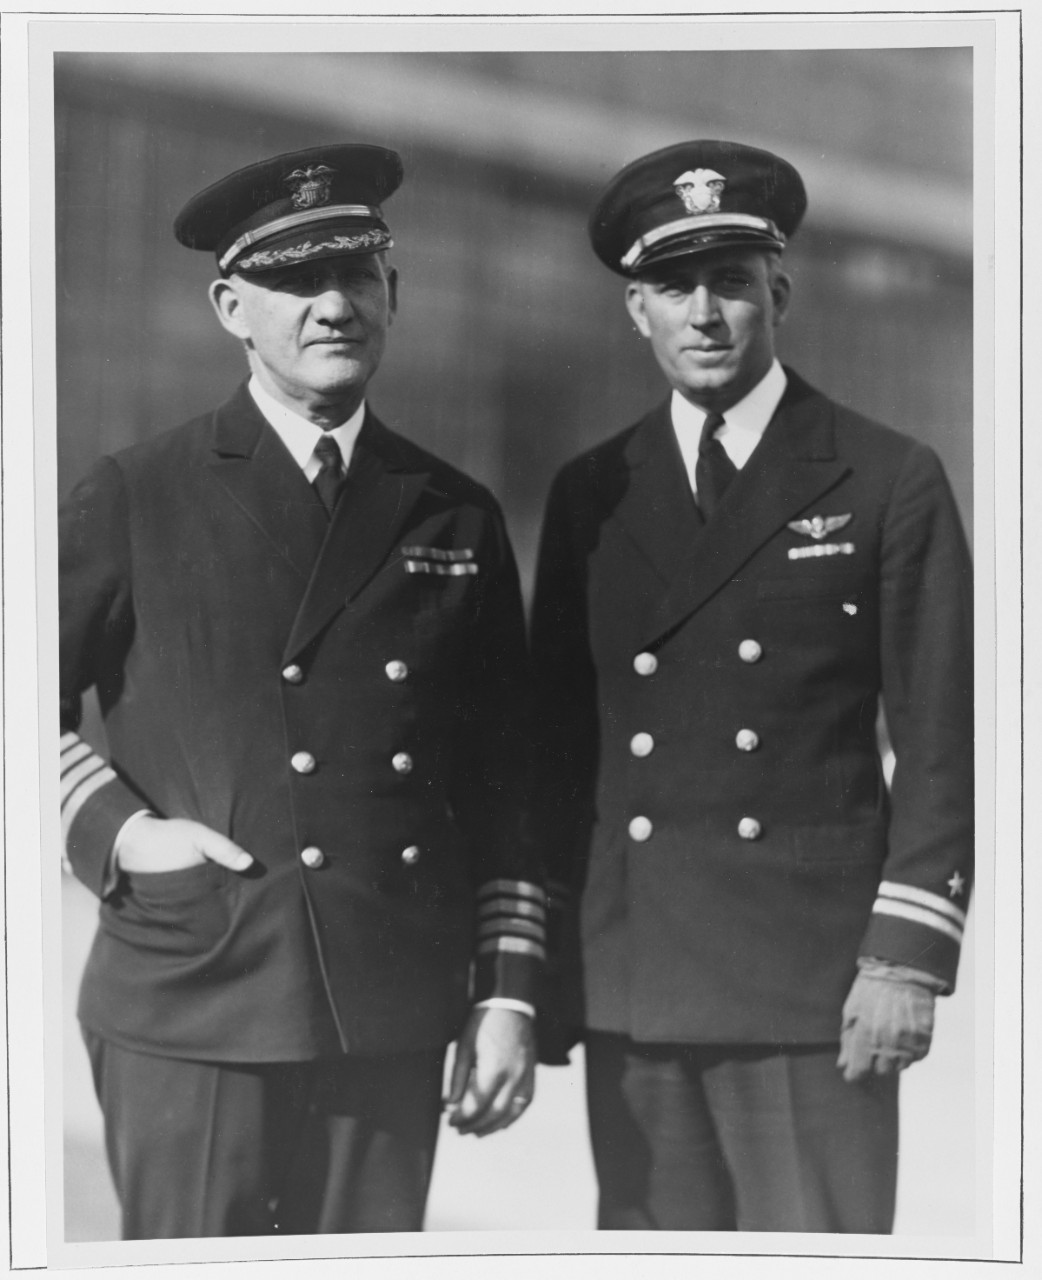 Captain Charles A. Blakely, USN and Lieutenant Richard F. Whitehead, USN.